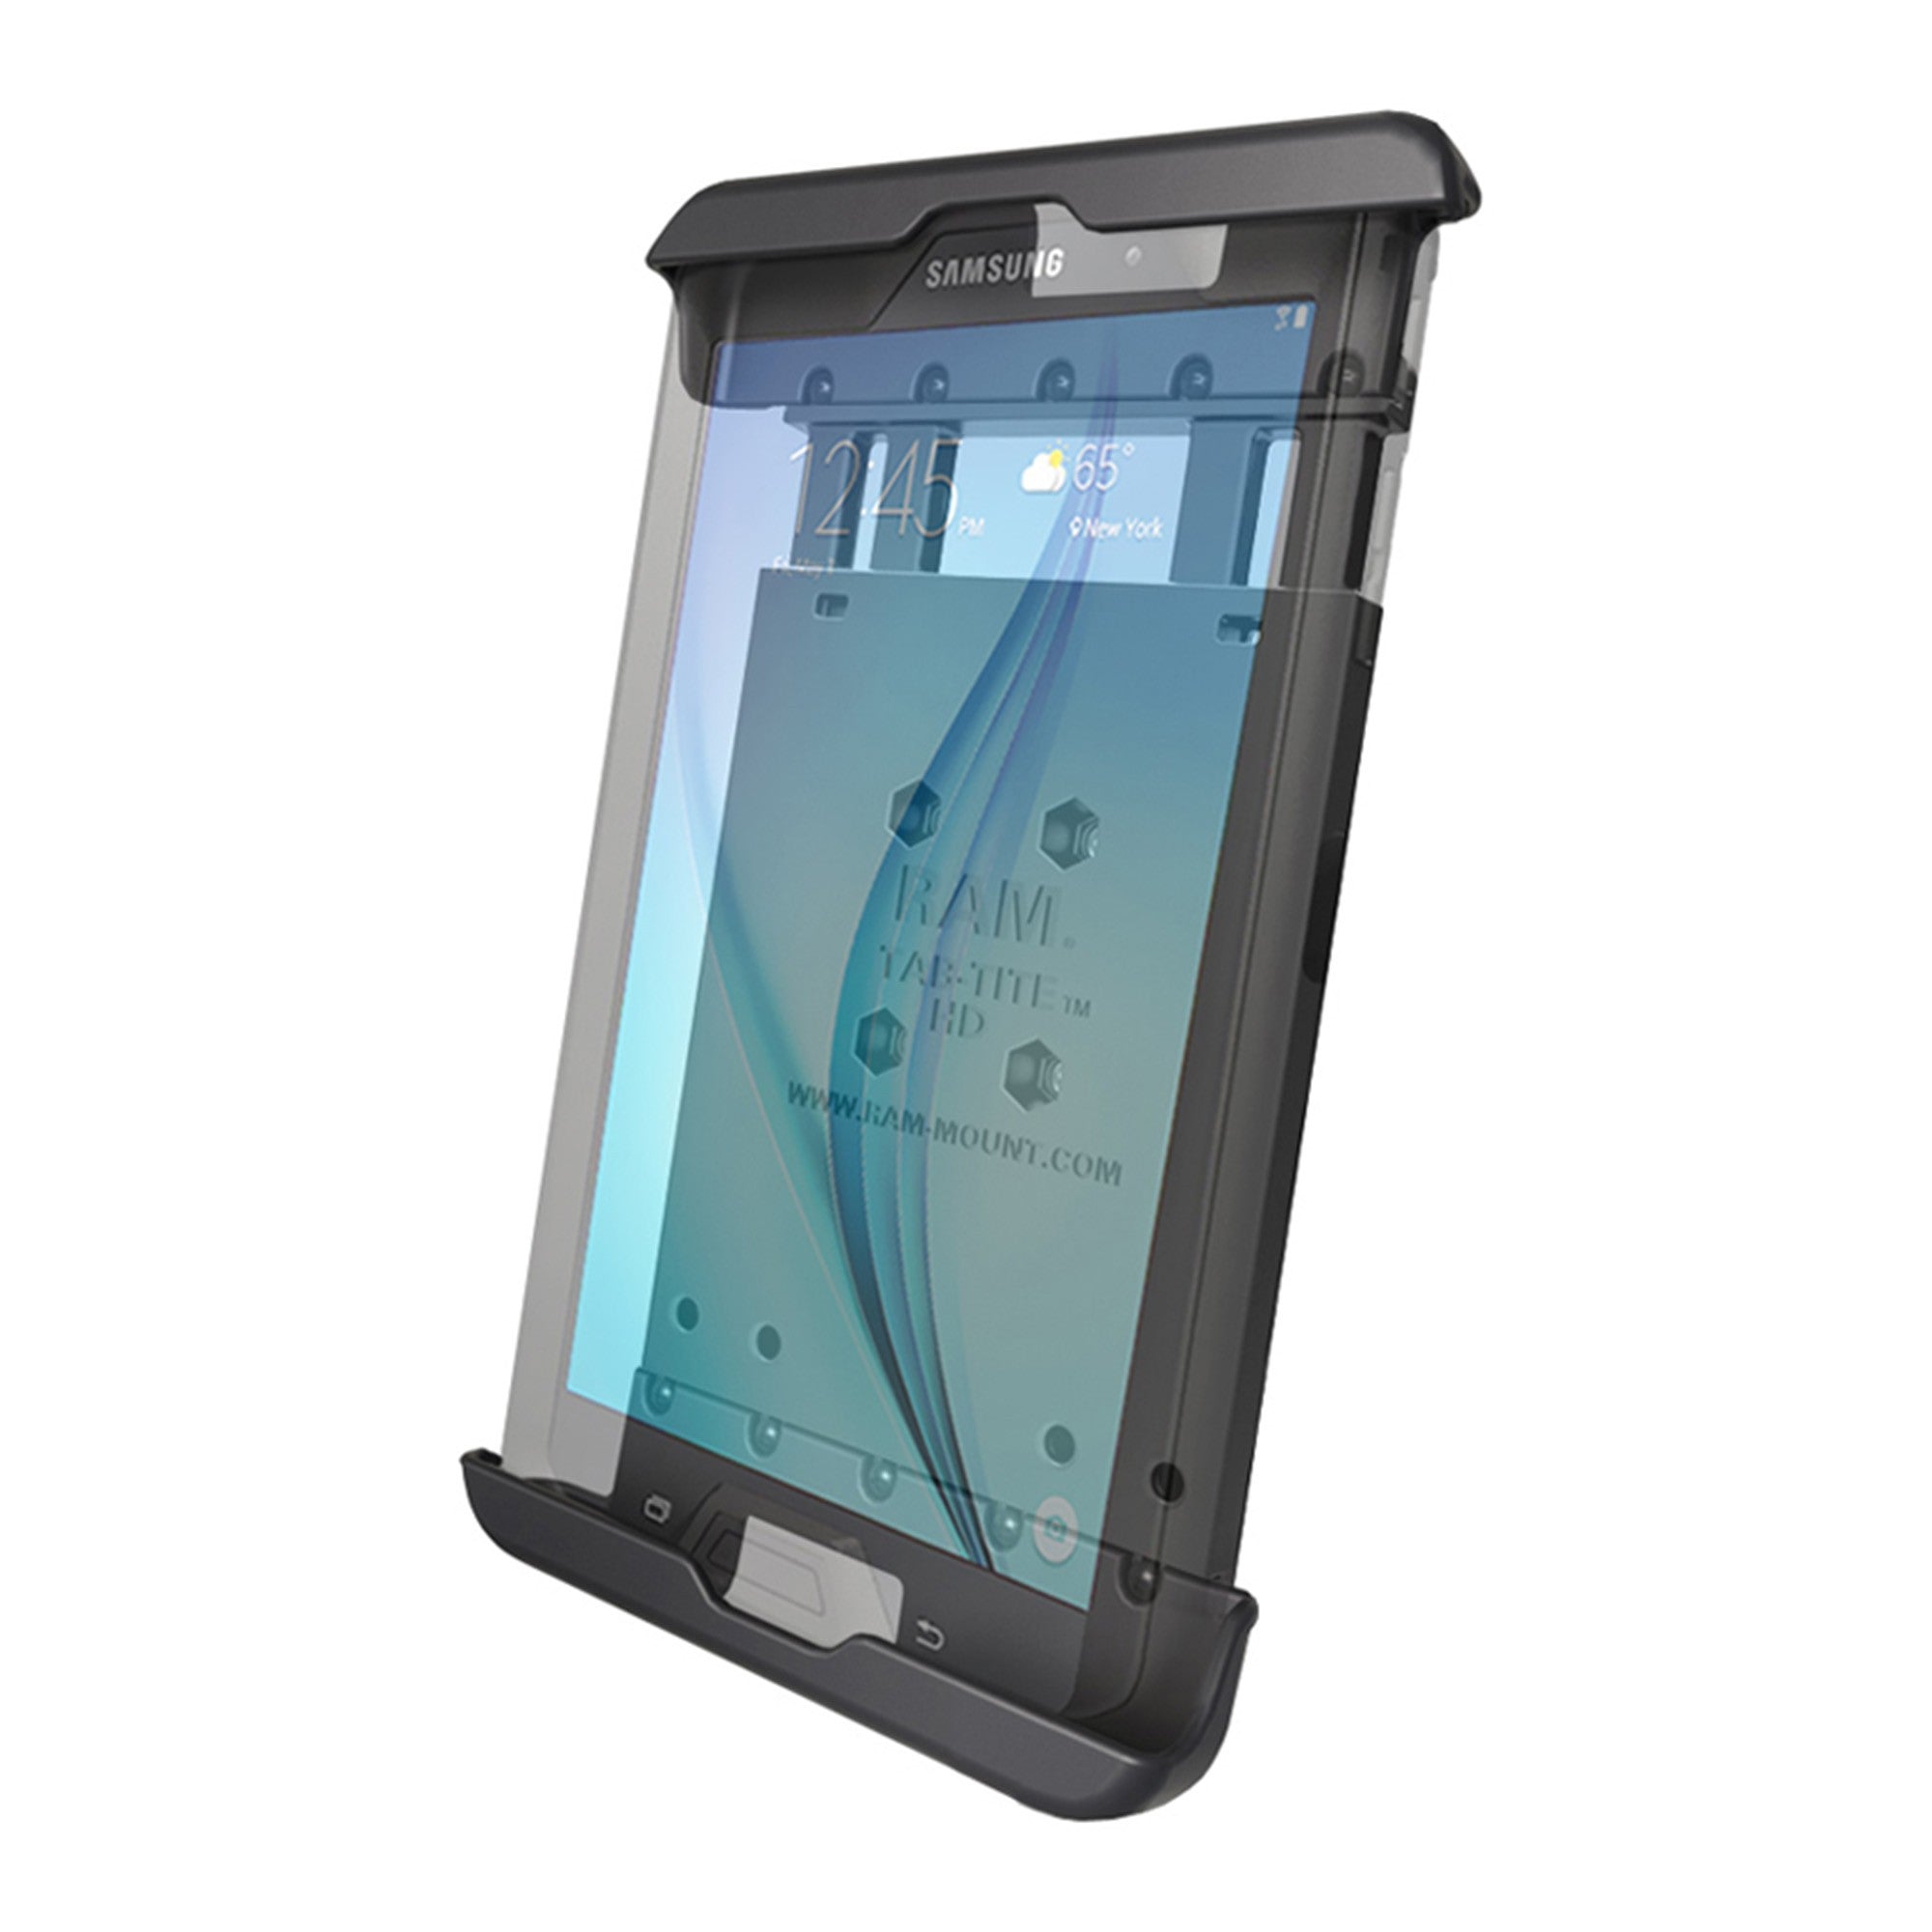 RAM Tab-Tite Spring Loaded Holder for 8" Tablets With Heavy Duty Case